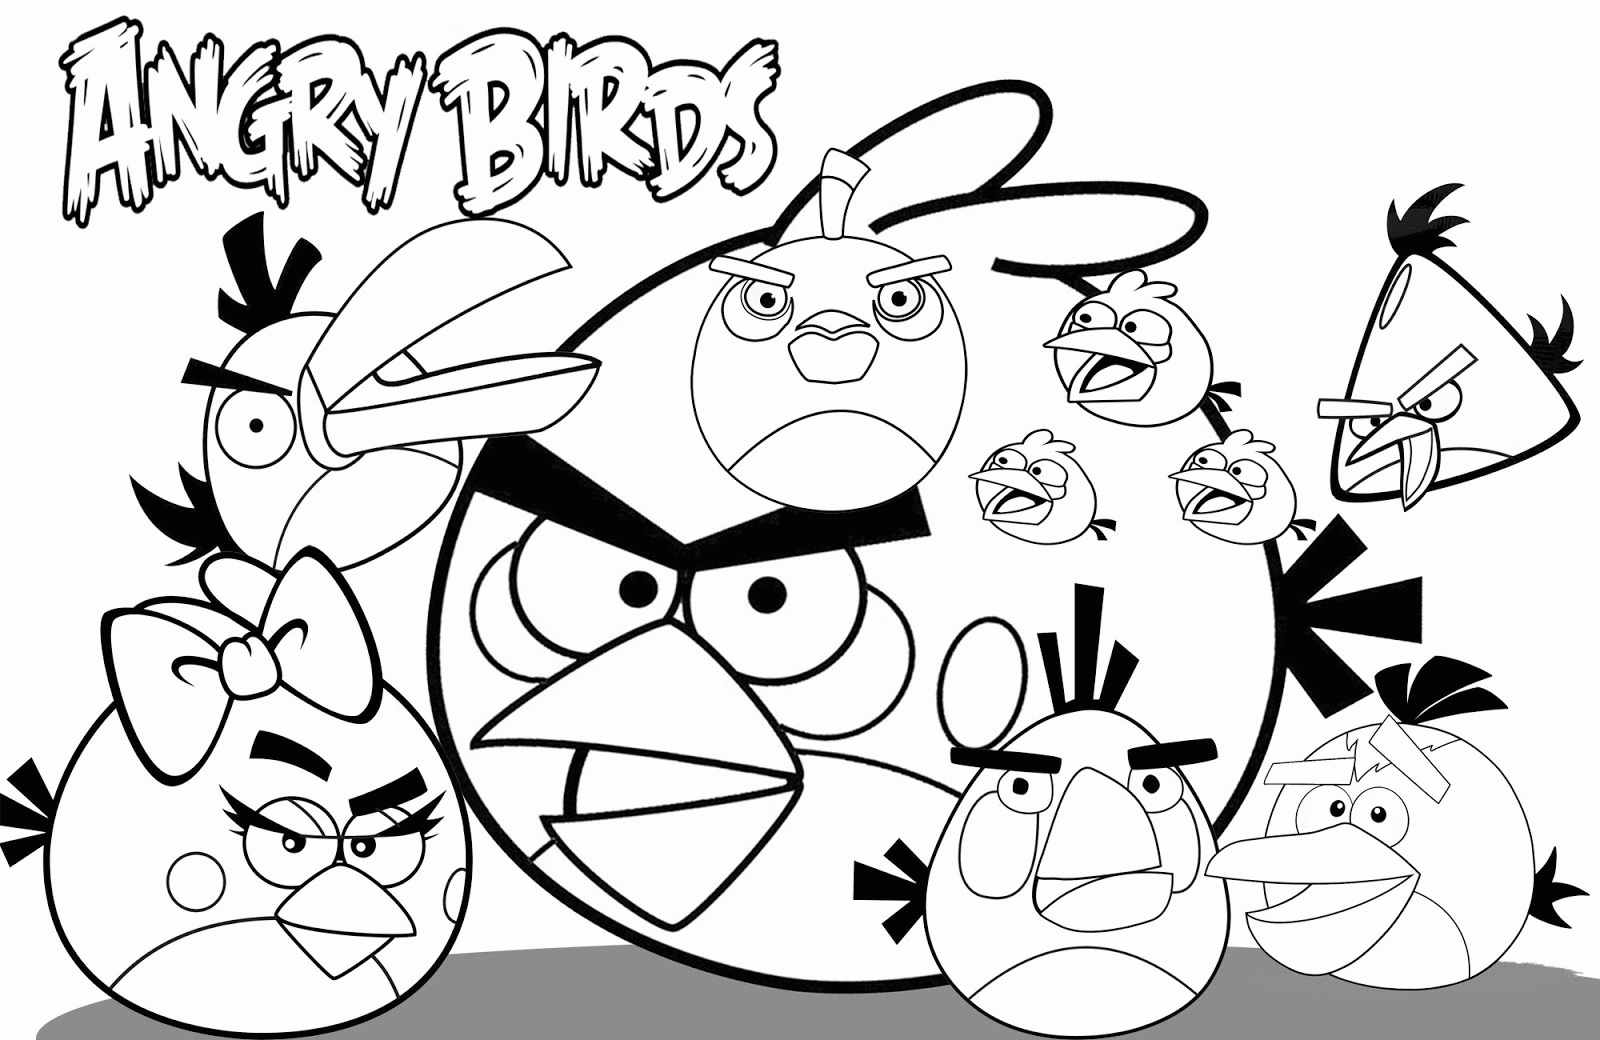 Coloring Pages Angry Birds | mugudvrlistscom